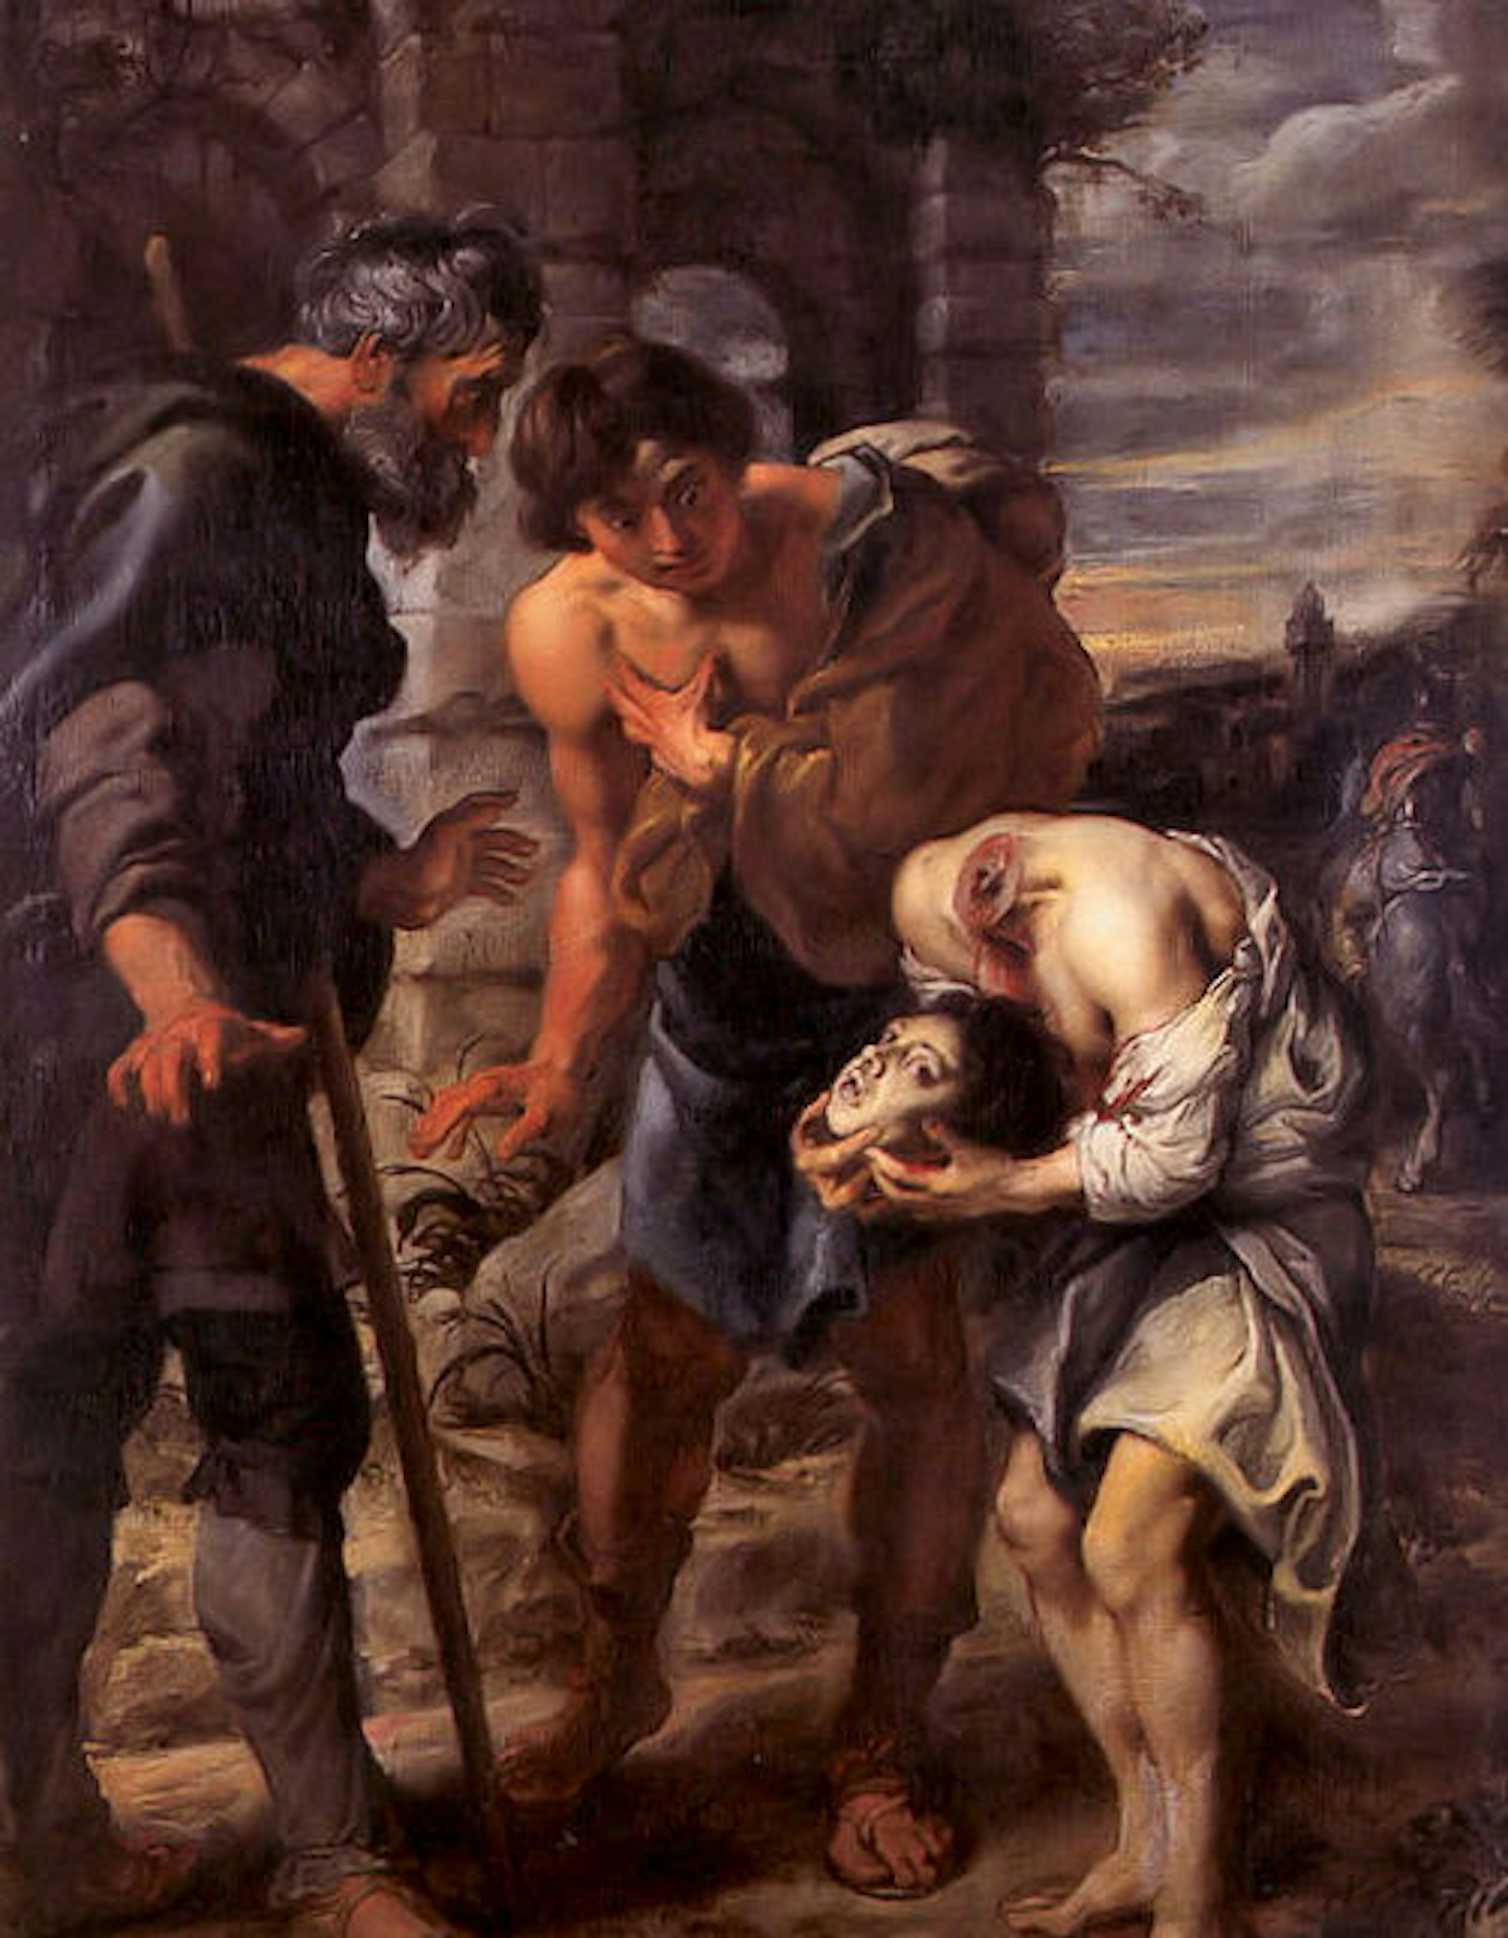     A painting by Sir Peter Paul Rubens illustrates the story of the 9-year-old martyr Justus, who would have held his head in his hands after being beheaded. Credit: Wikimedia Commons 